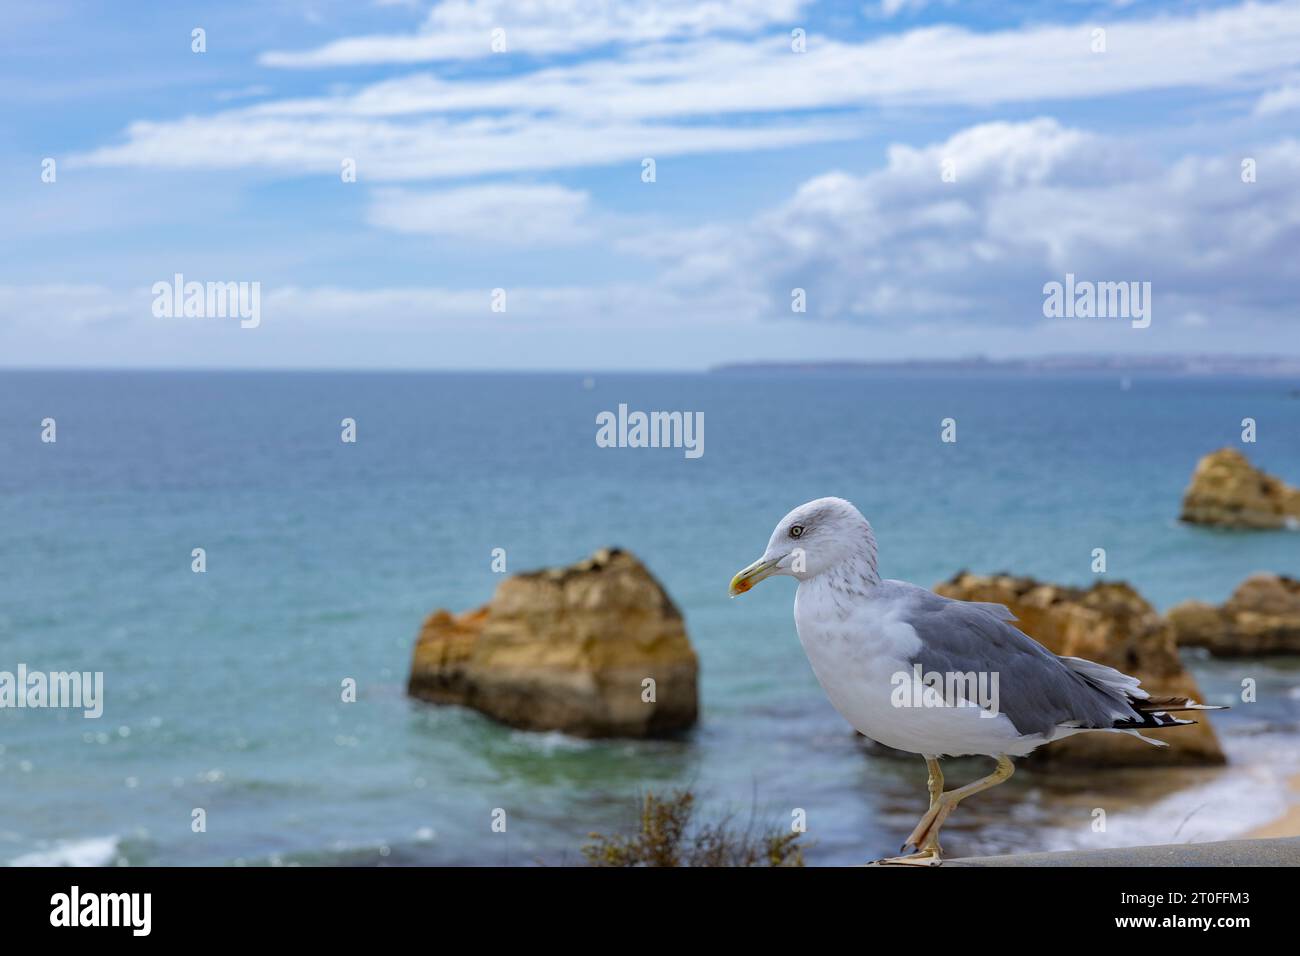 Close up to a Seagull standing on wall with the Tree Castles Beach (Praia dos Tres Castelos) in the background. Portimao, Algarve, Portugal. Stock Photo